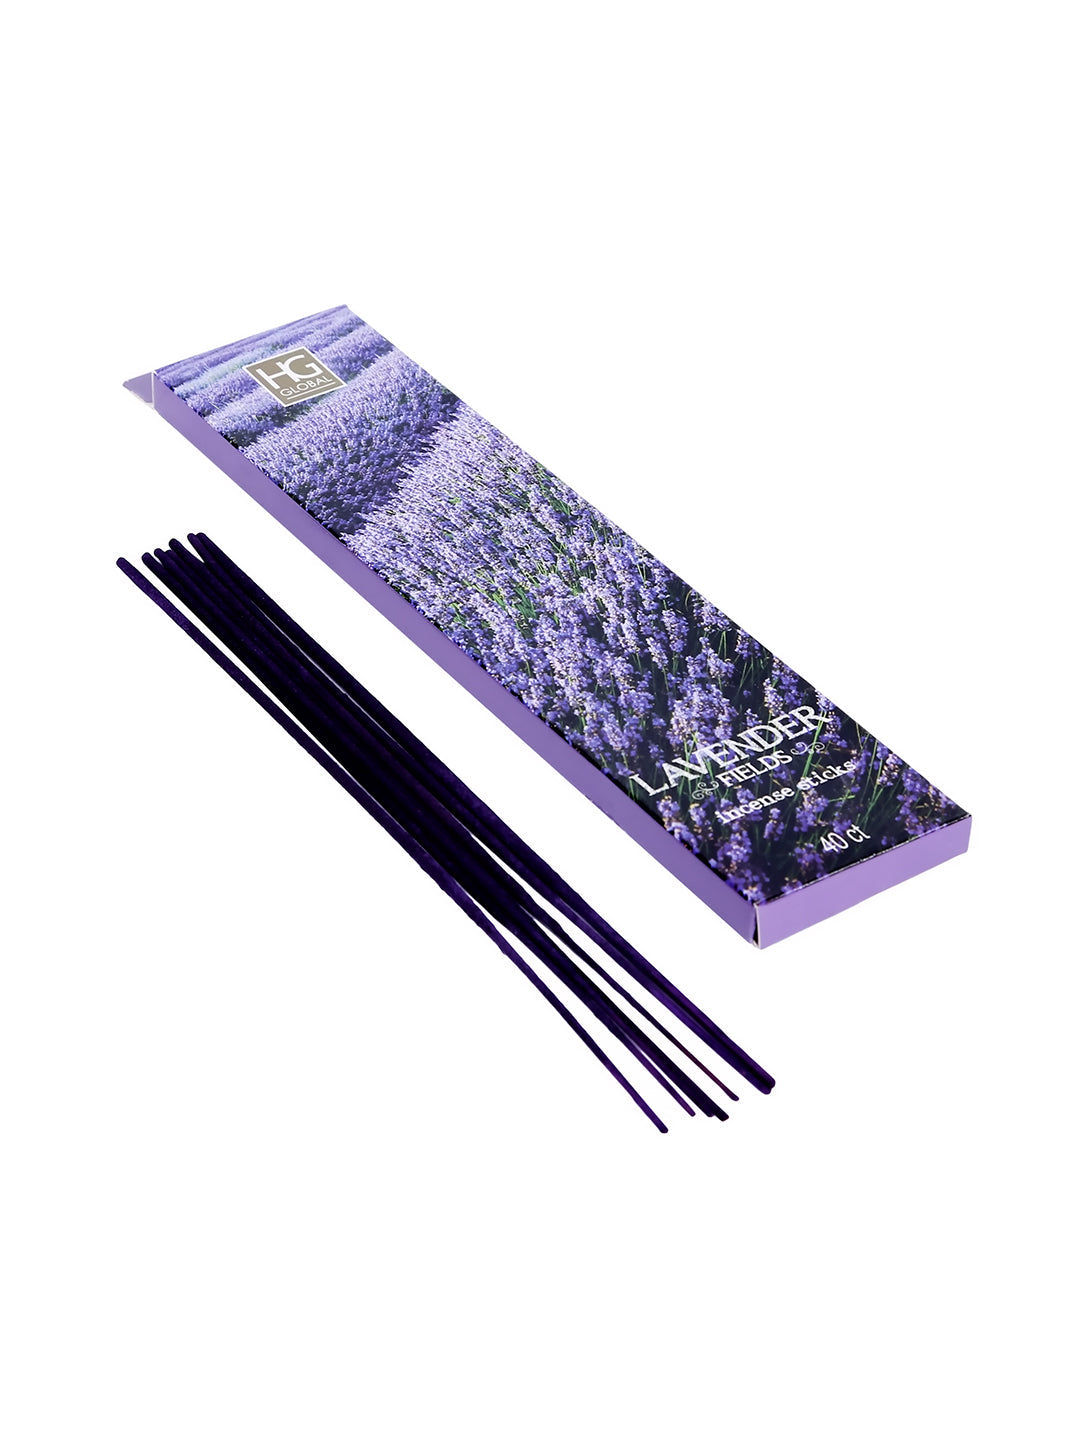 Set of 240 Highly Fragranced Hosley® Lavender Fields Incense Sticks (packed in forty piece count boxes) with bonus Decorative Butterfly Shaped Wooden Holder